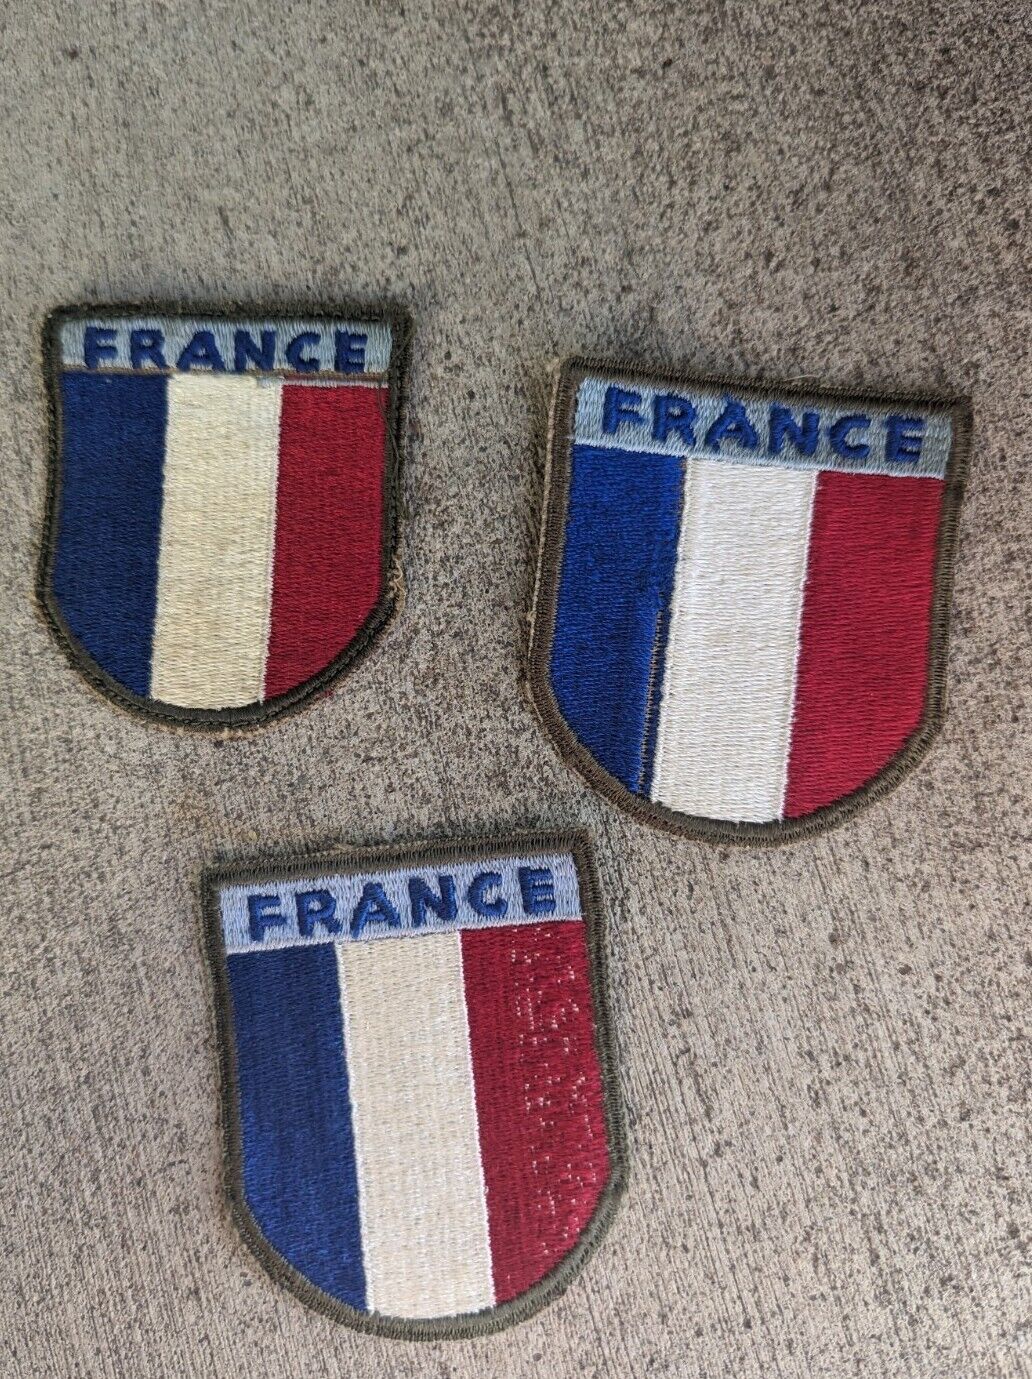 Original EMBROIDERED WW2 U.S. TRAINED FREE FRENCH FORCES Shoulder PATCHES EF